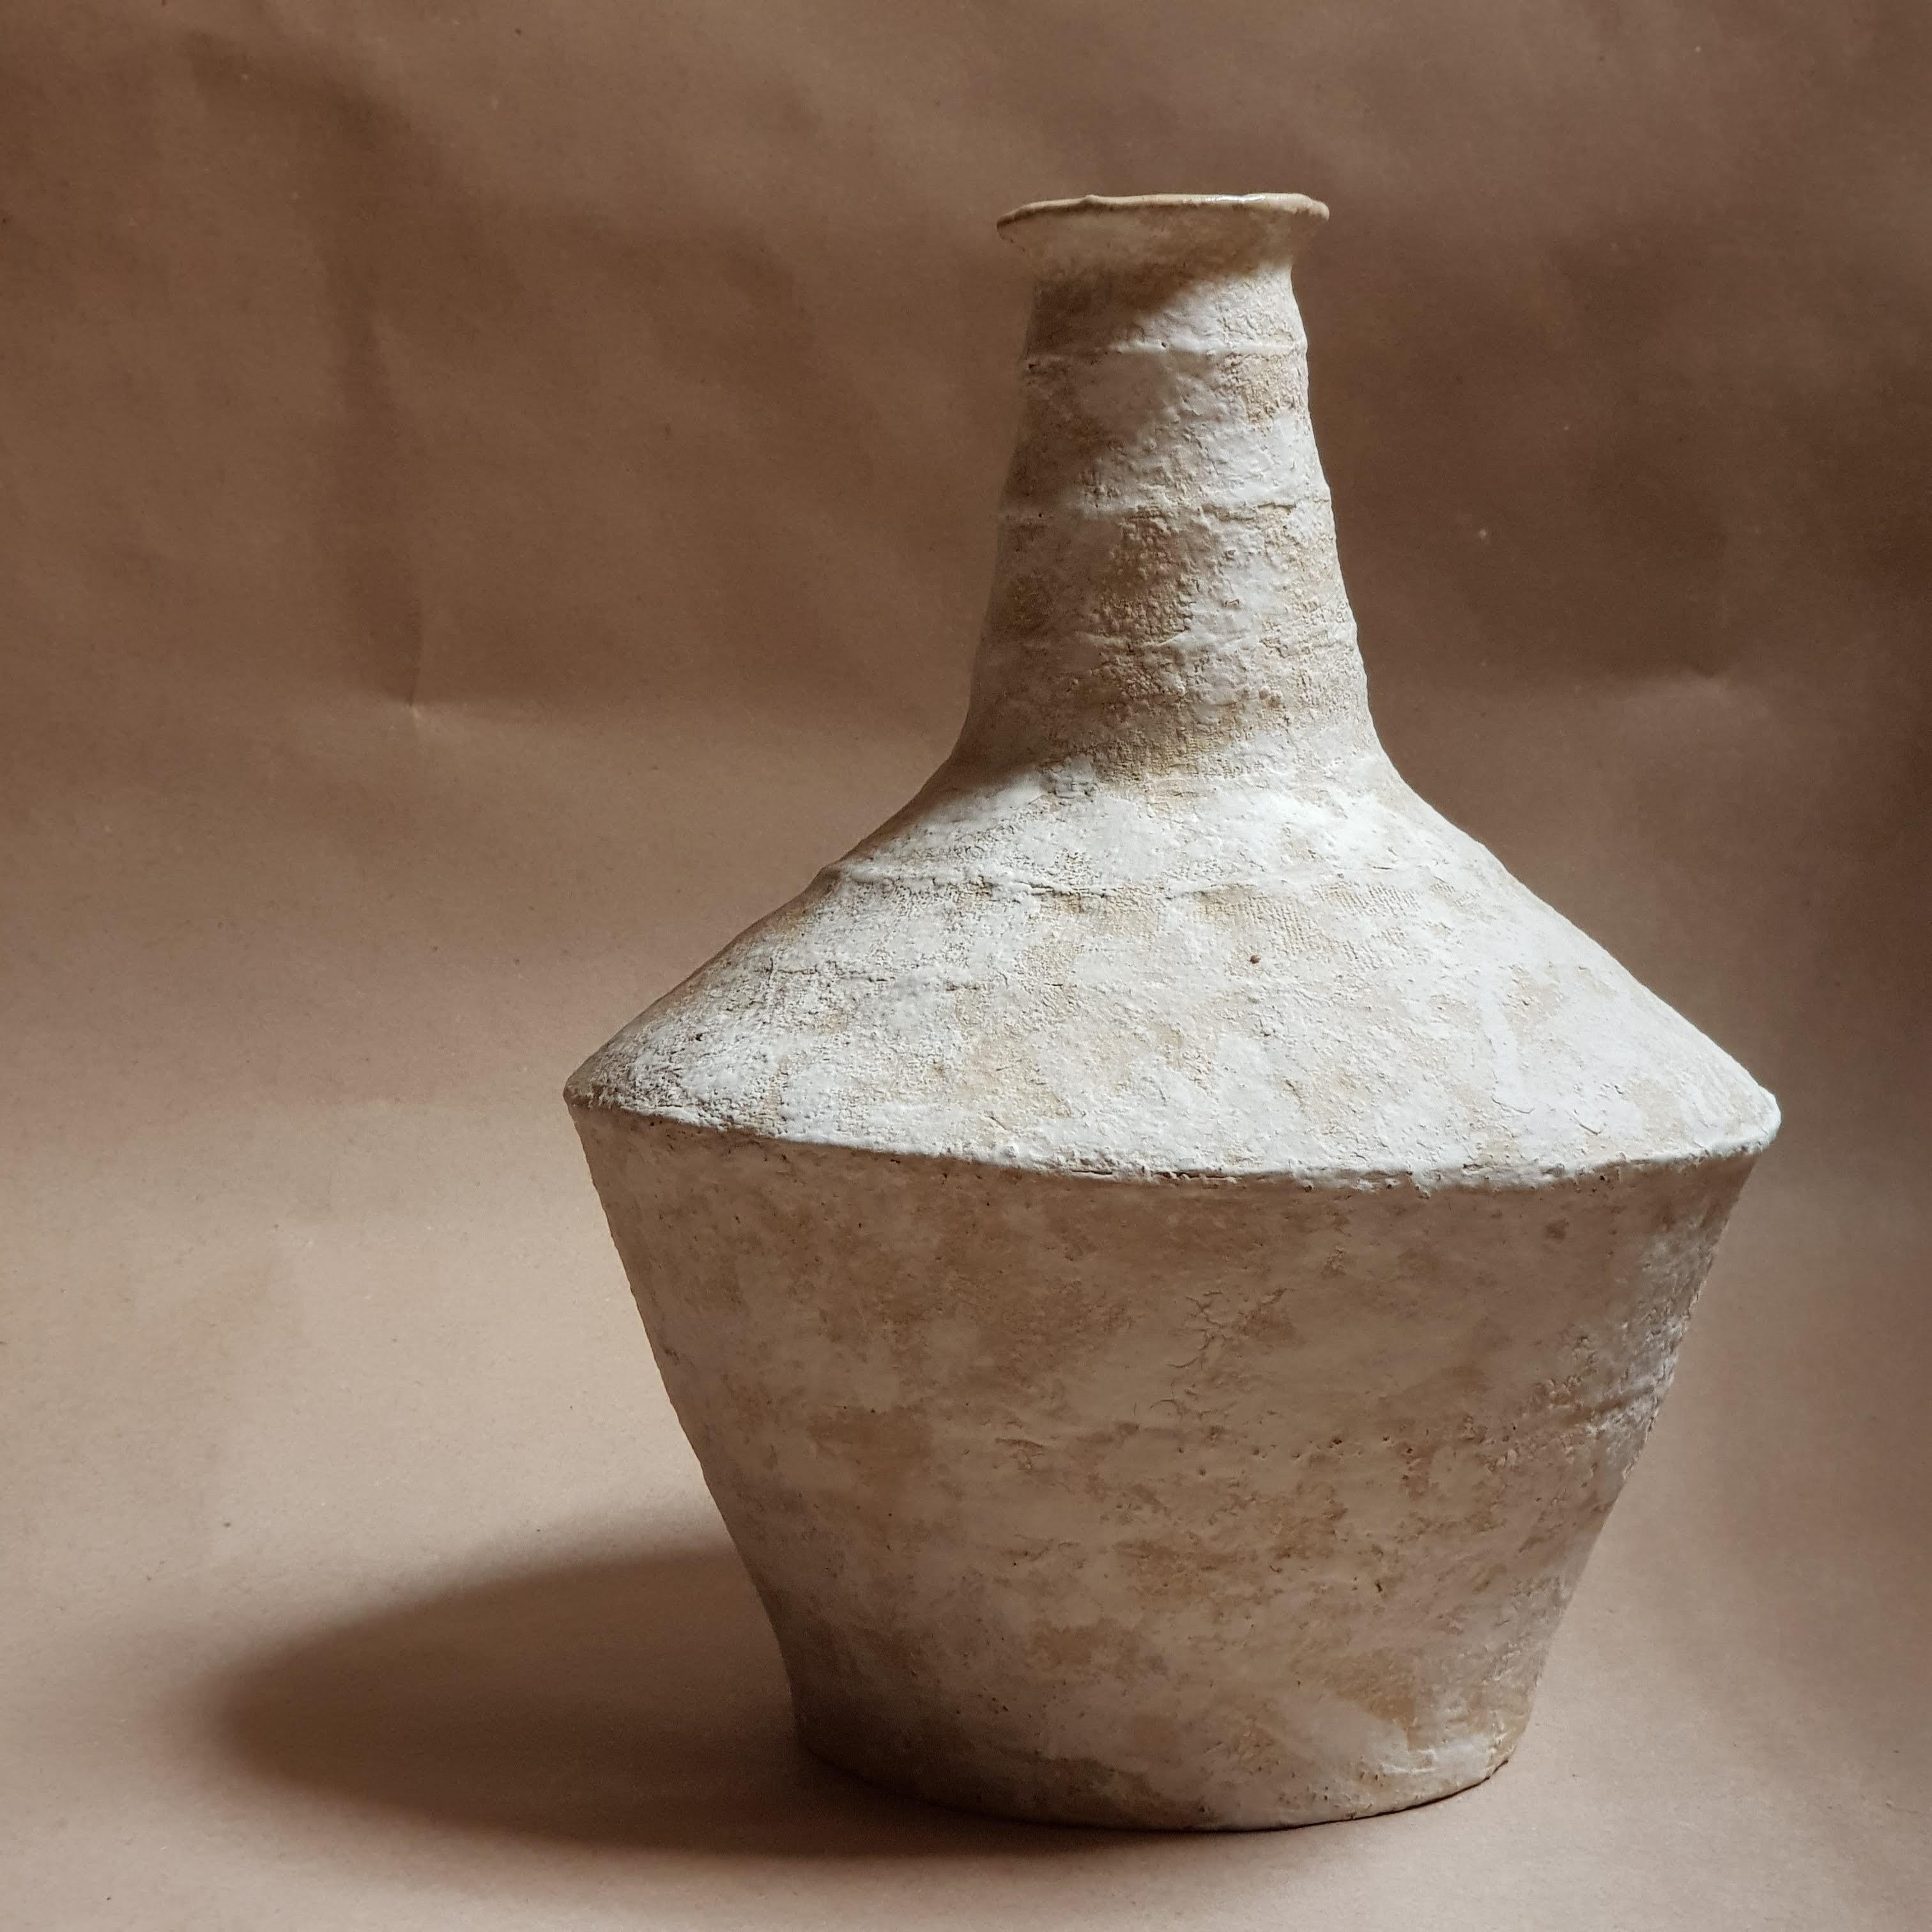 Beige Stoneware Lagynos Vase by Elena Vasilantonaki
Unique
Dimensions: ⌀ 19 x H 23 cm (Dimensions may vary)
Materials: Stoneware
Available finishes: Black, Beige, Brown, Red, Terracotta, White Patina

Growing up in Greece I was surrounded by pottery